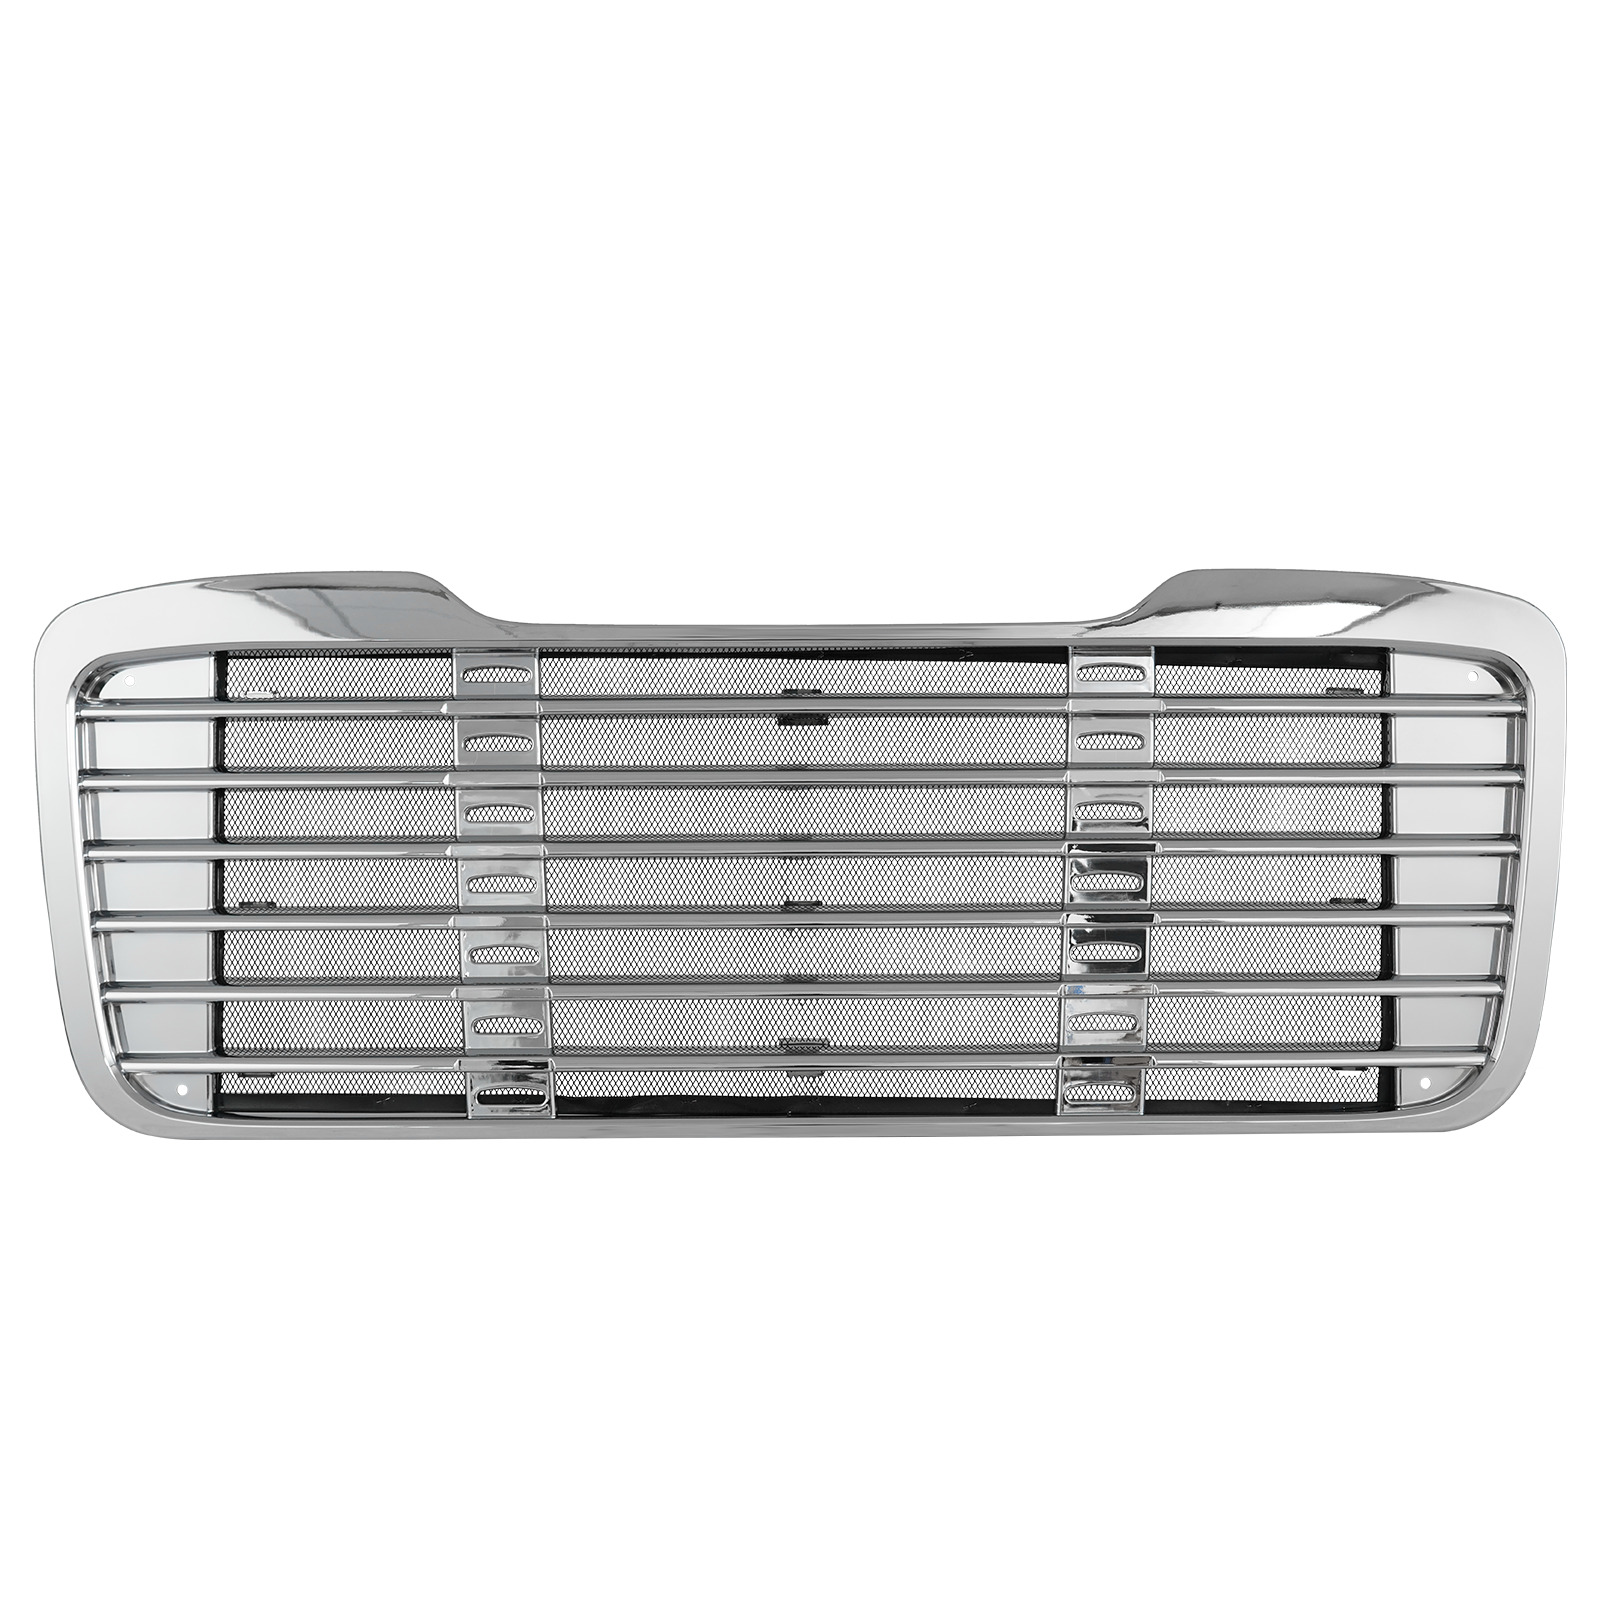 For Freightliner M2 New Grille Chrome 1714787000 A17-14787-001 2003 2004 - 2015